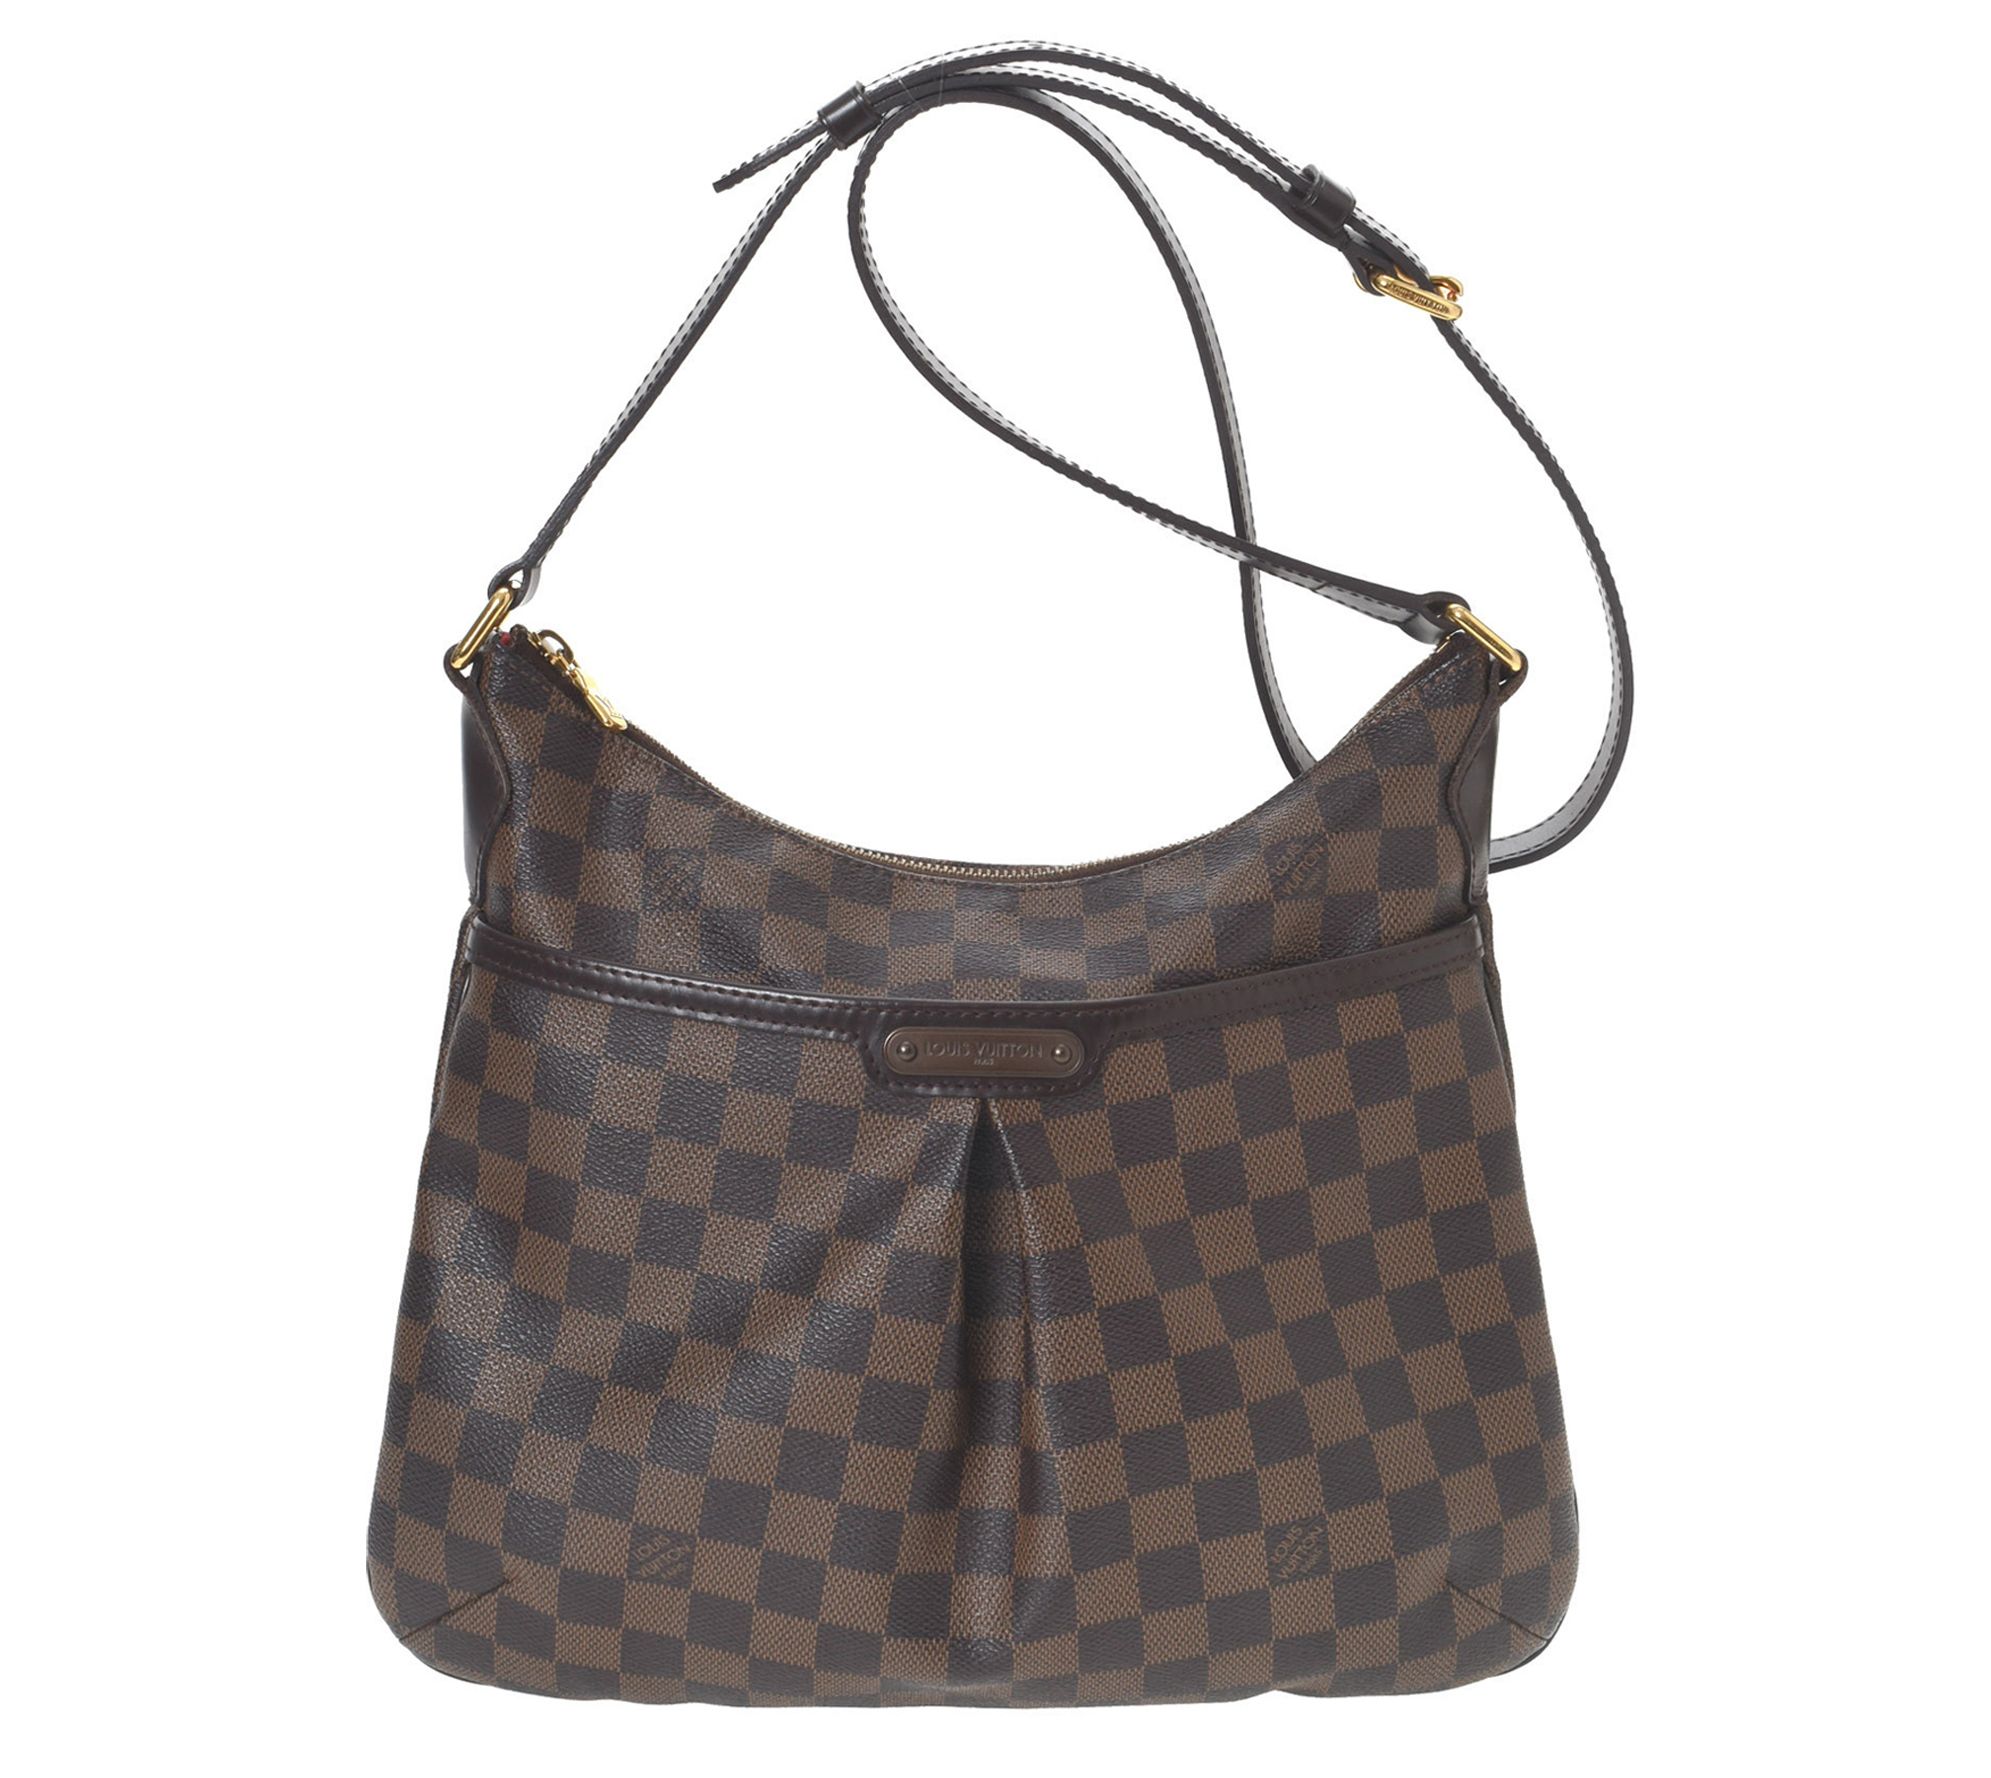 Pre-Owned Louis Vuitton Bloomsbury PM Shoulder Bag- 2235RY5 